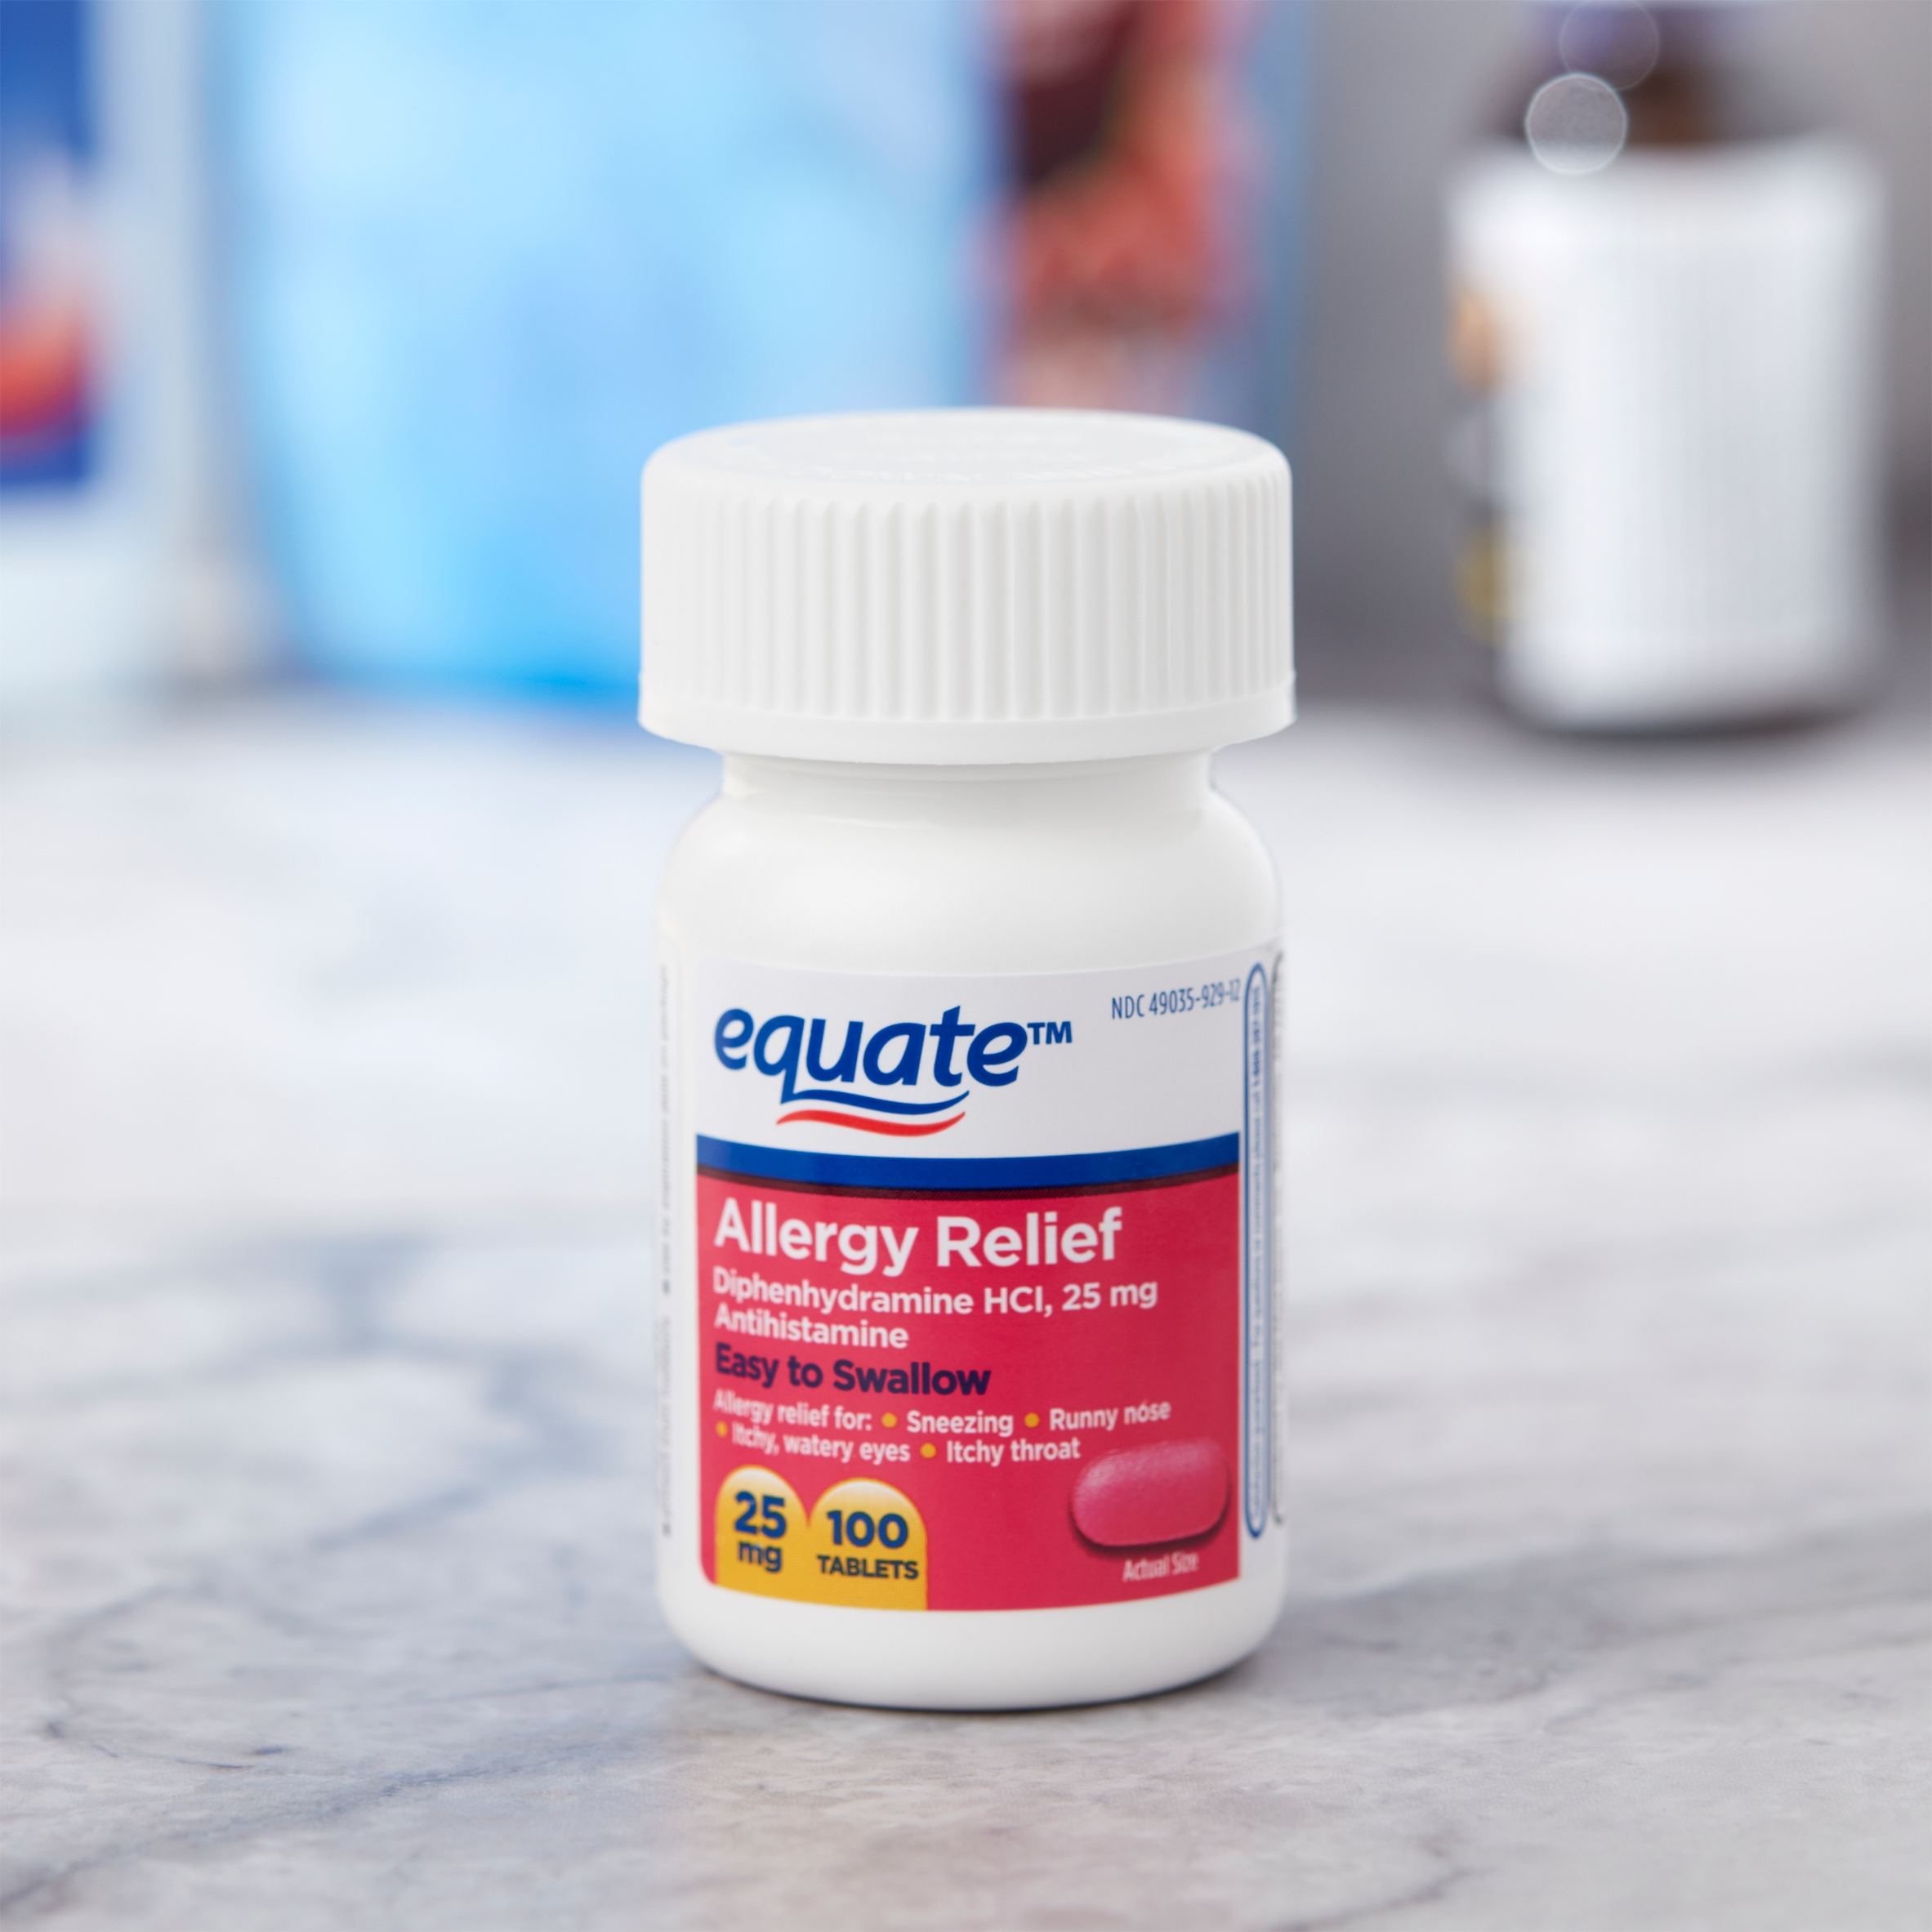 Equate Allergy Relief Tablets, 25 mg, 100 Count - image 2 of 7